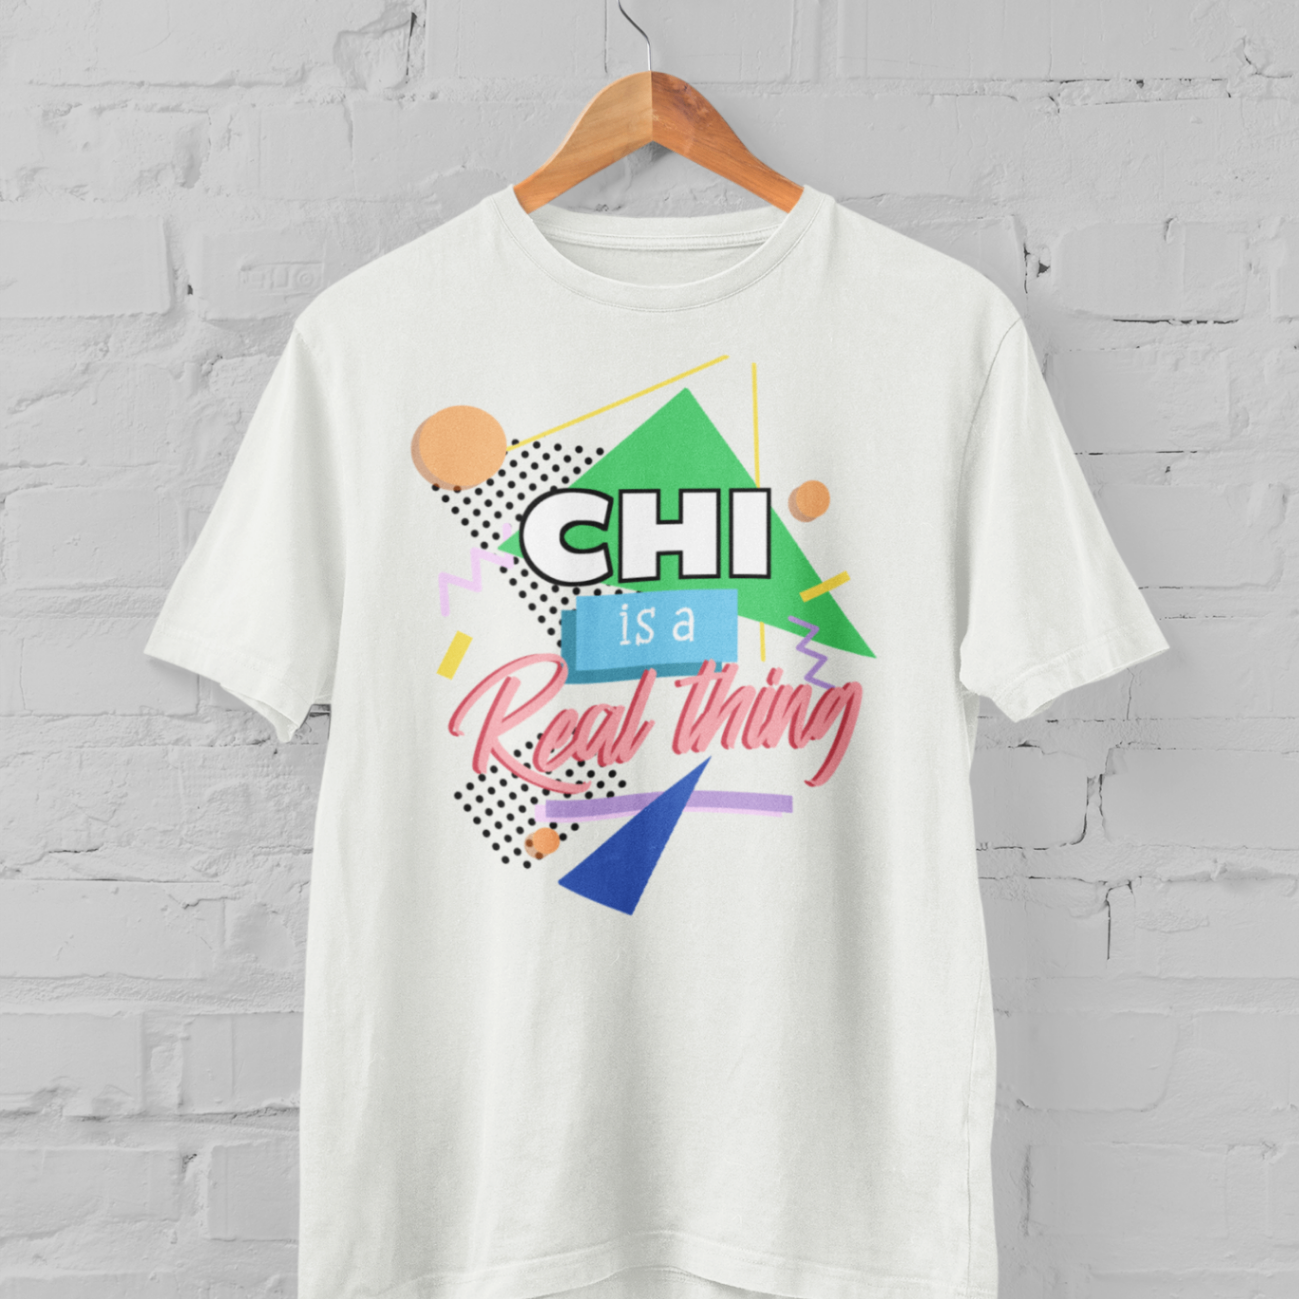 White t-shirt 'chi is a real thing' design